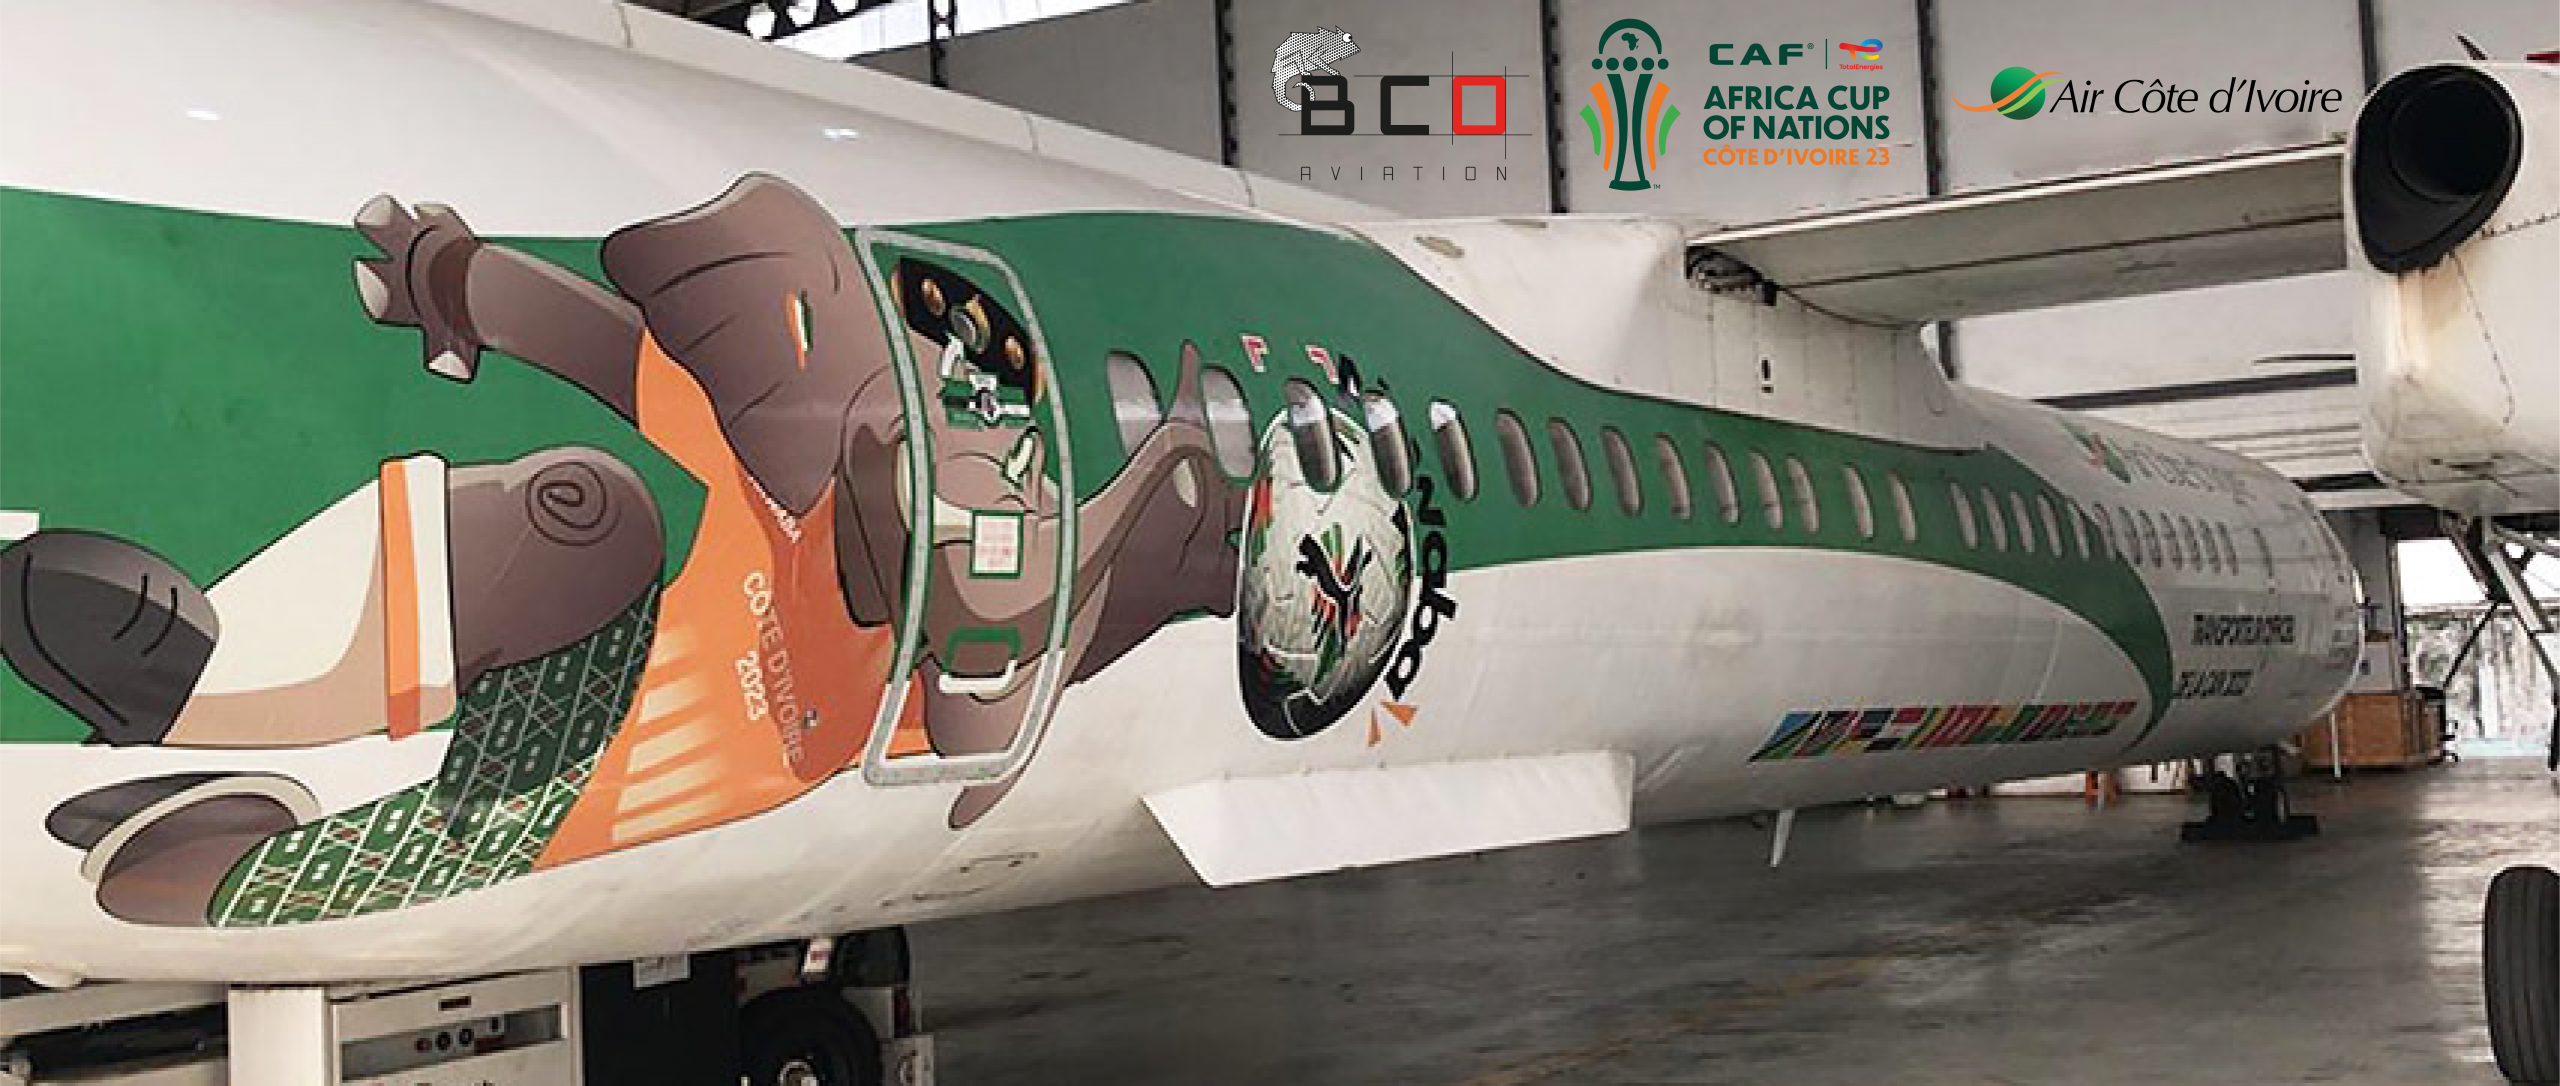 Illustration for: Air Côte d’Ivoire partners with CAN 2023